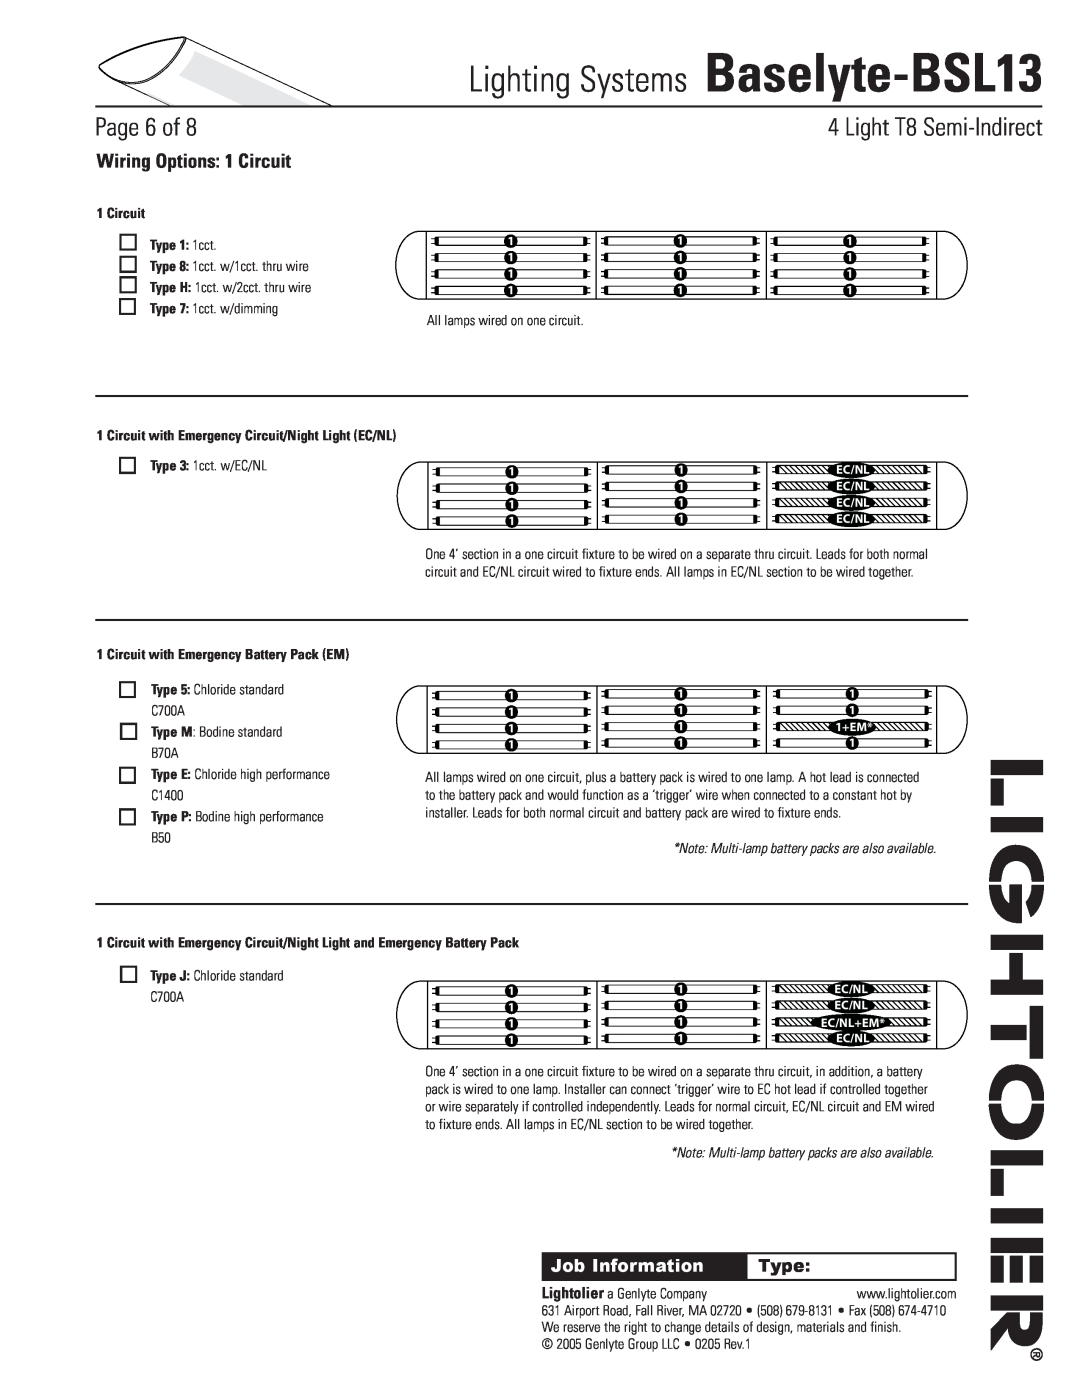 Lightolier Baselyte-BSL13 Wiring Options 1 Circuit, Circuit Type 1 1cct, Circuit with Emergency Battery Pack EM, Page of 